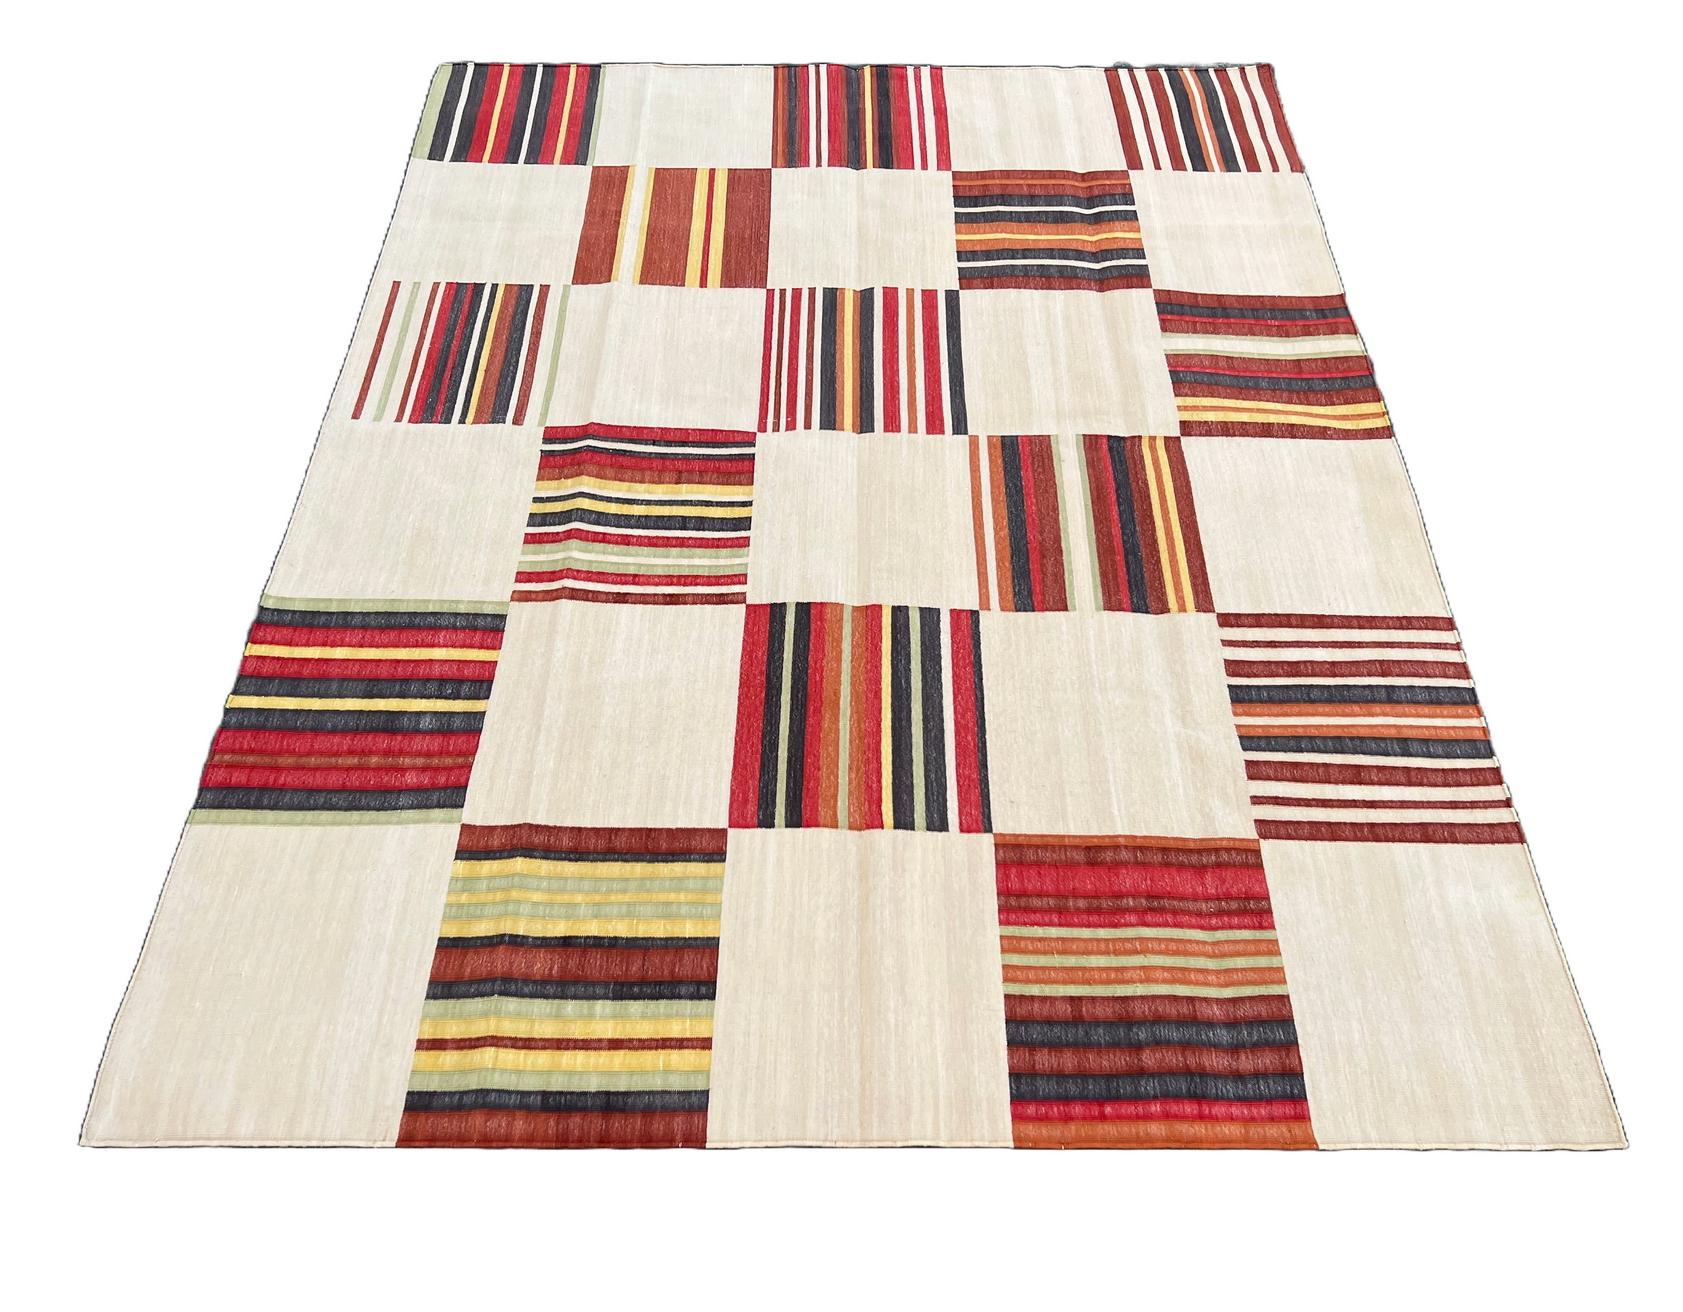 Hand-Woven Handmade Cotton Area Flat Weave Rug, 6x8 Beige And Red Striped Indian Dhurrie For Sale